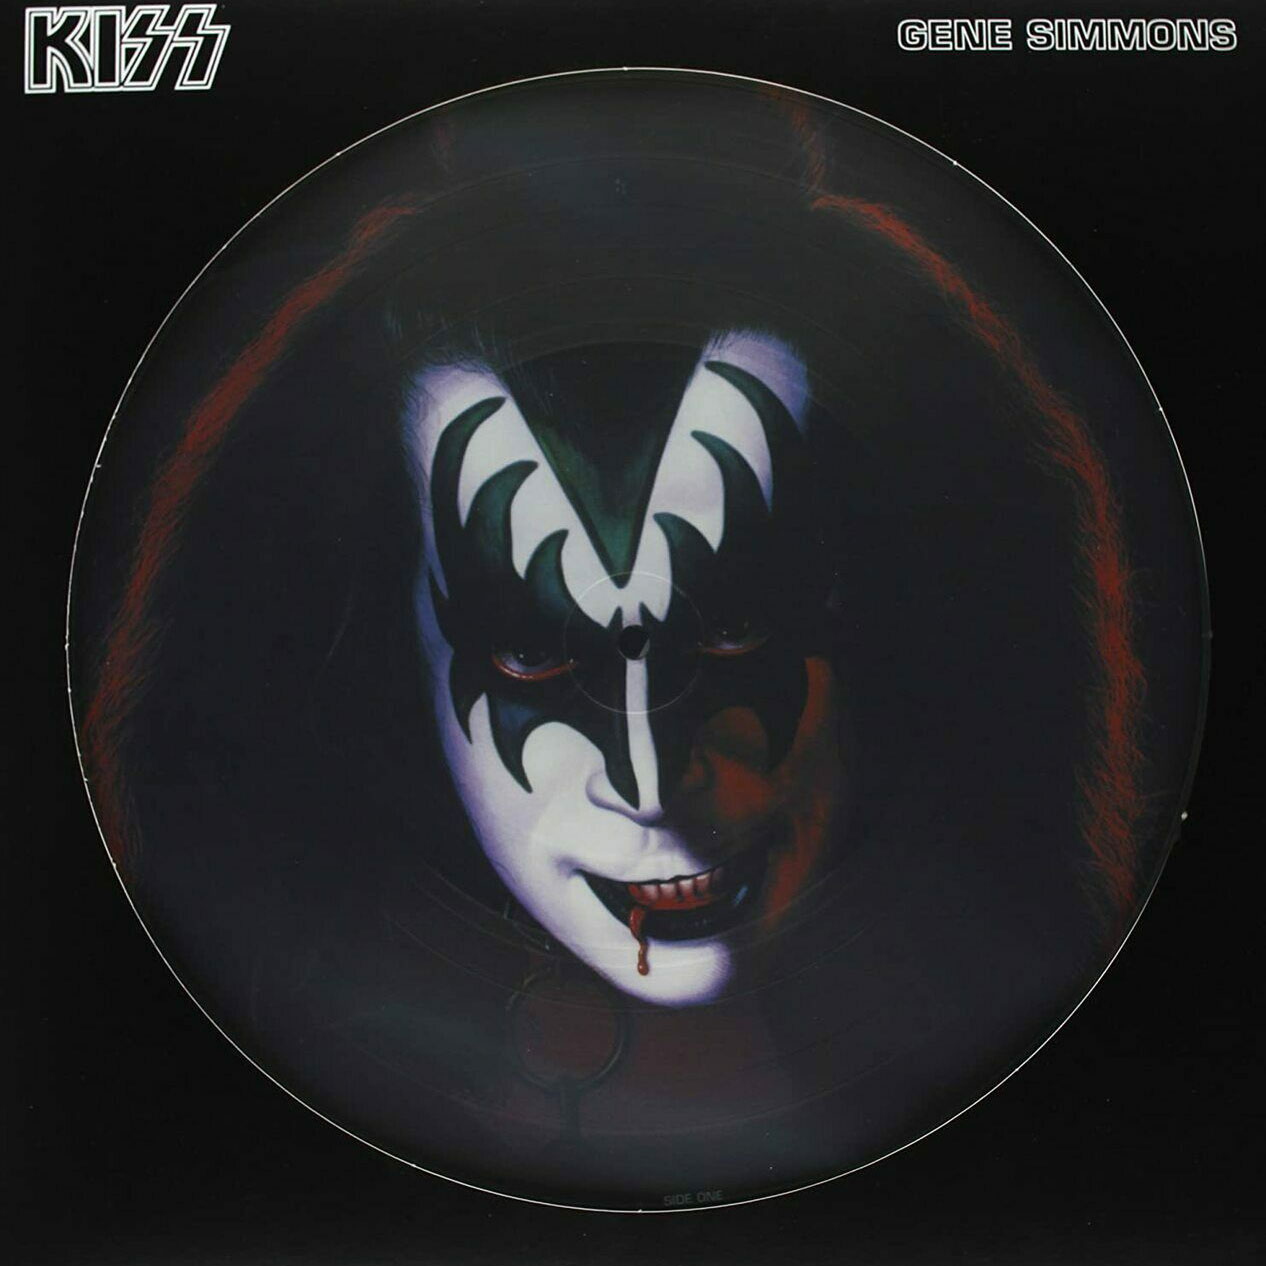 Kiss---Gene-Simmons-picture-disc-1-1